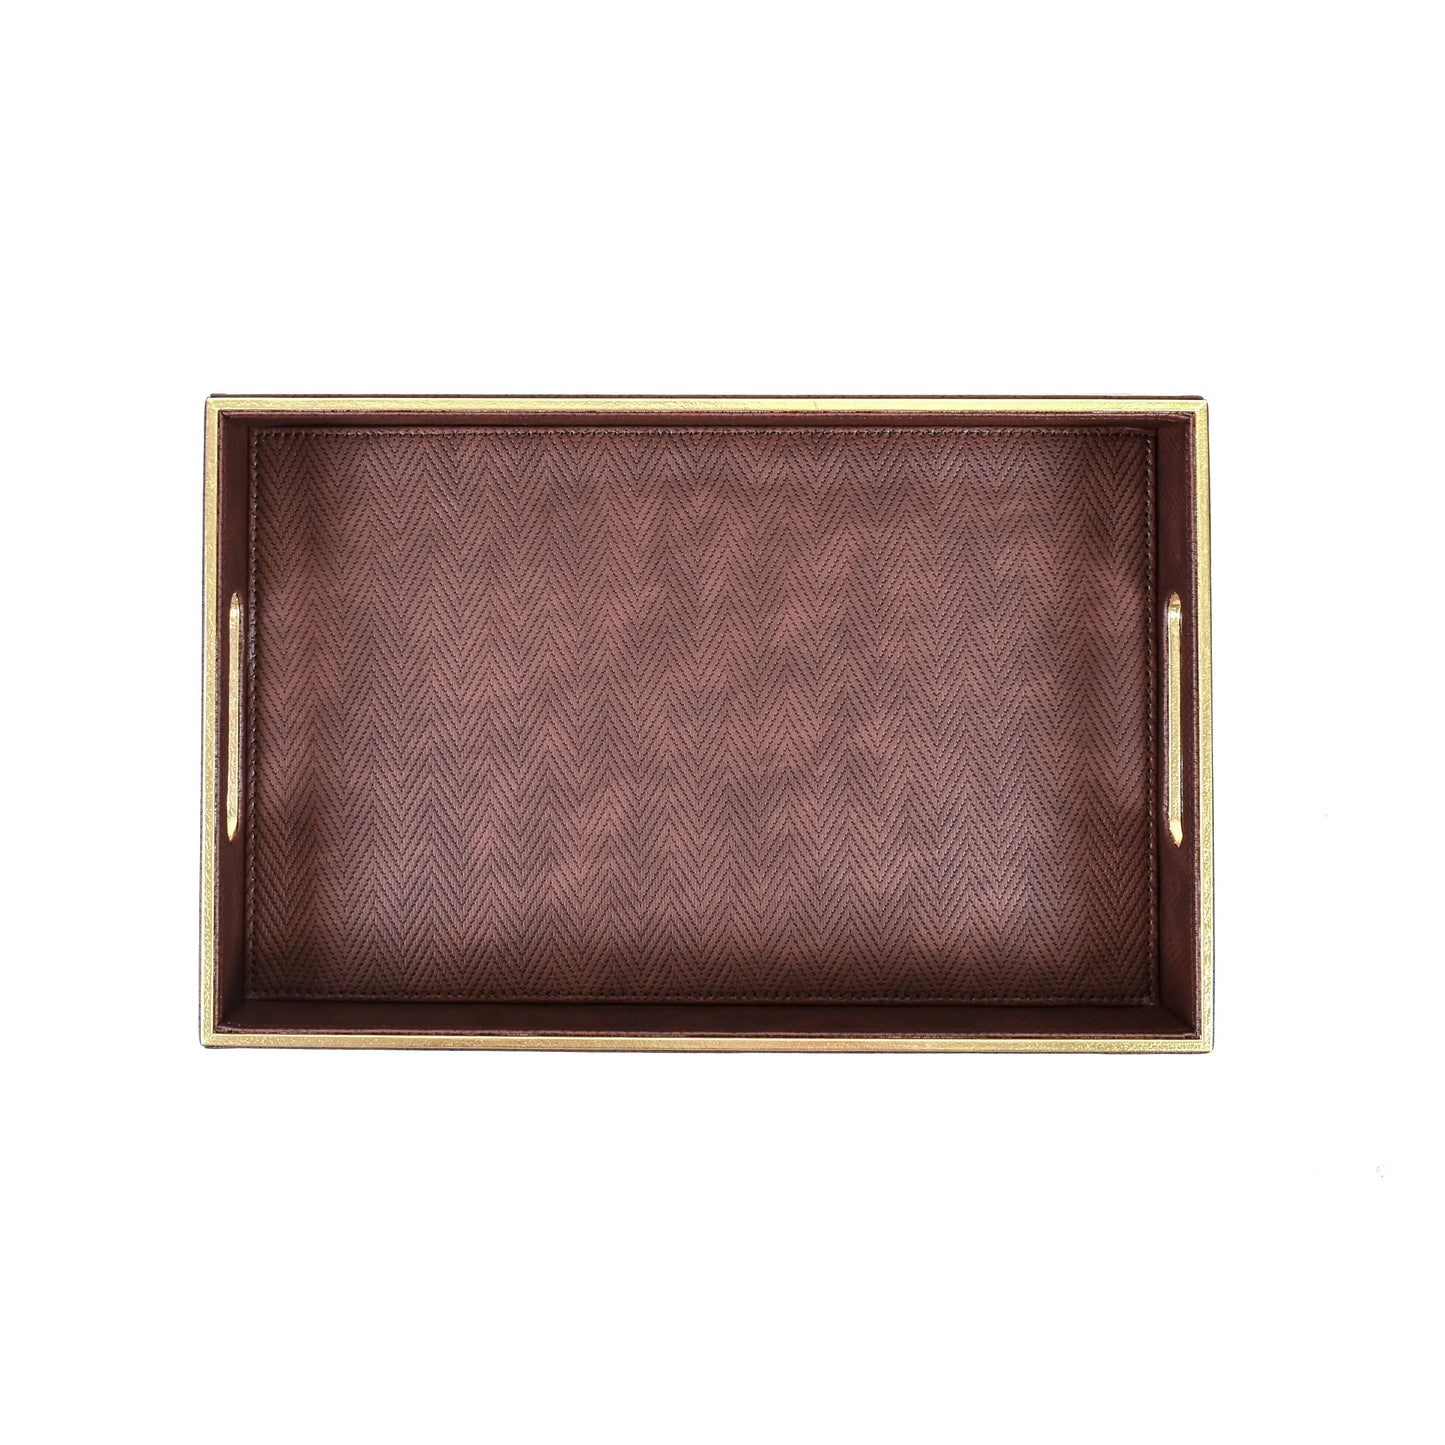 Leatherette Display And Accent Large Butler Tray | Brown | Hamilton Ichkan